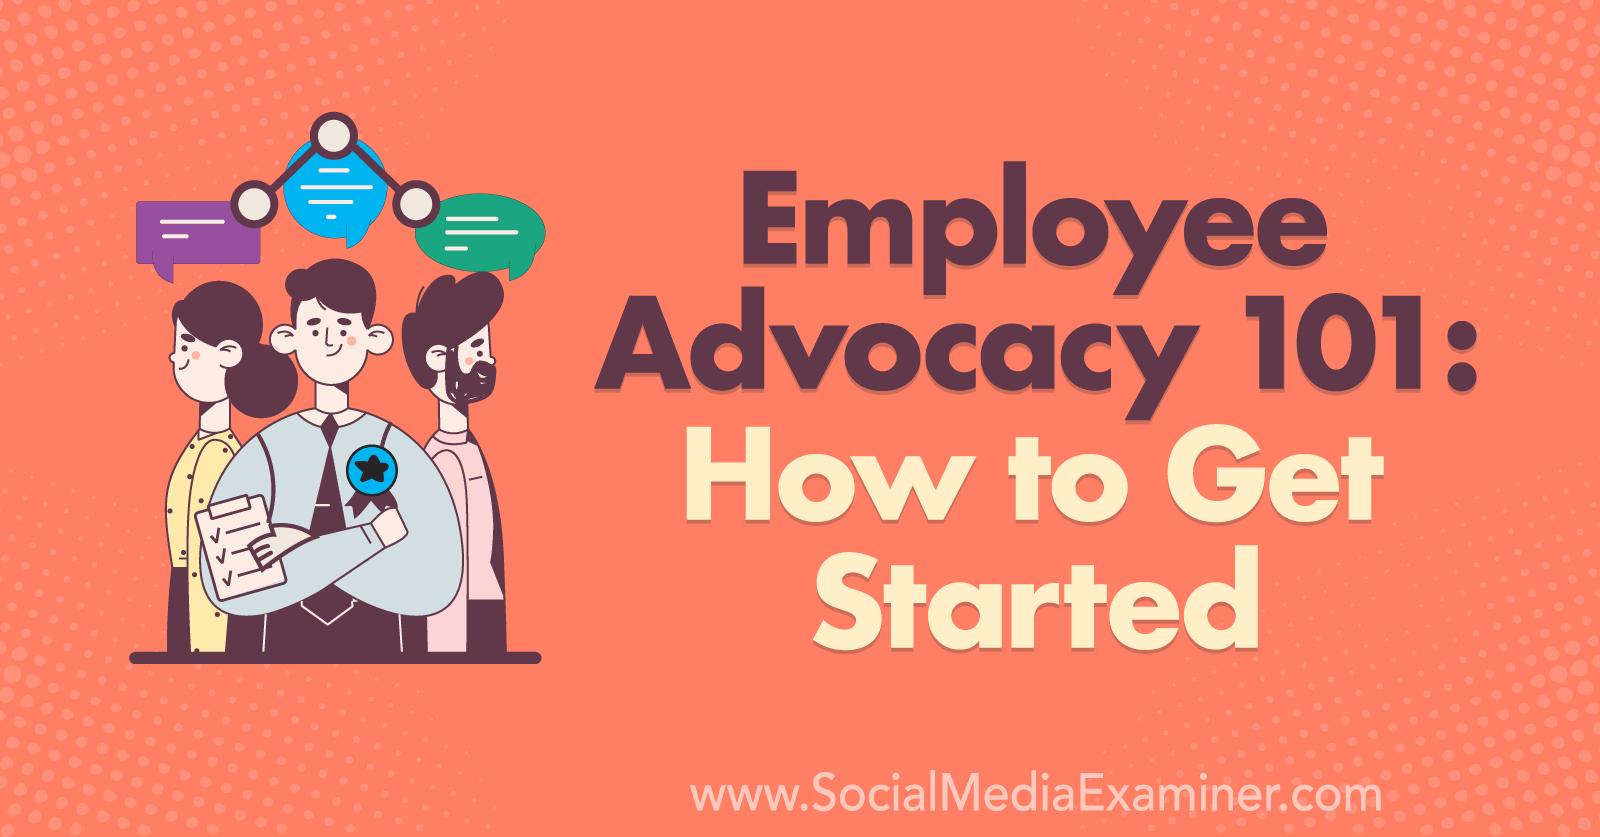 Employee Advocacy 101: How to Get Started by Corinna Keefe on Social Media Examiner.